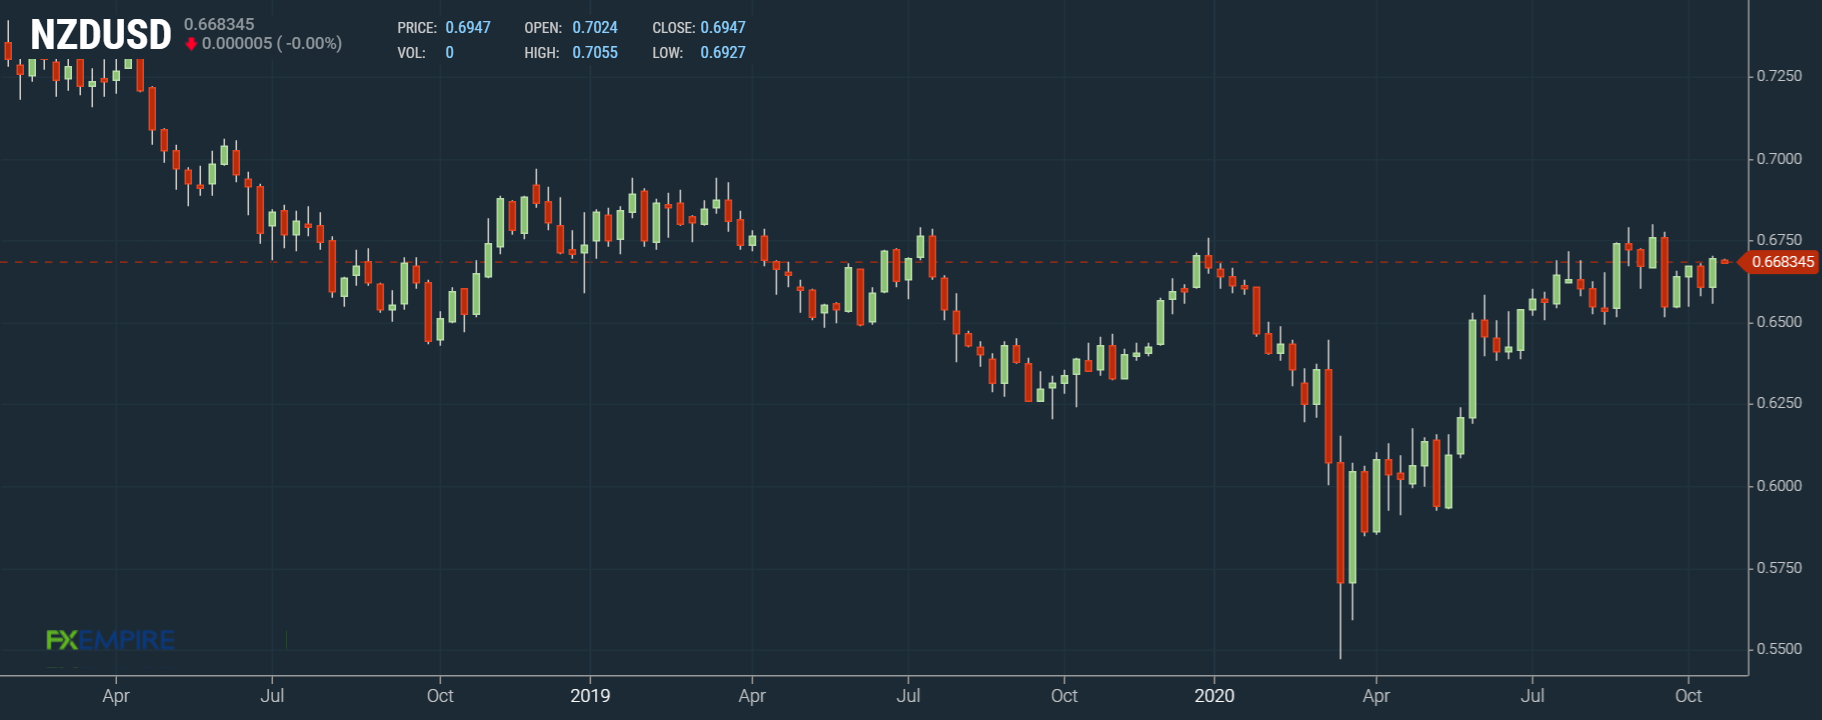 [WEEKLY NOTION] FXEMPIRE - AUD/USD & NZD/USD Weekly Forecast - Oct 26, 2020